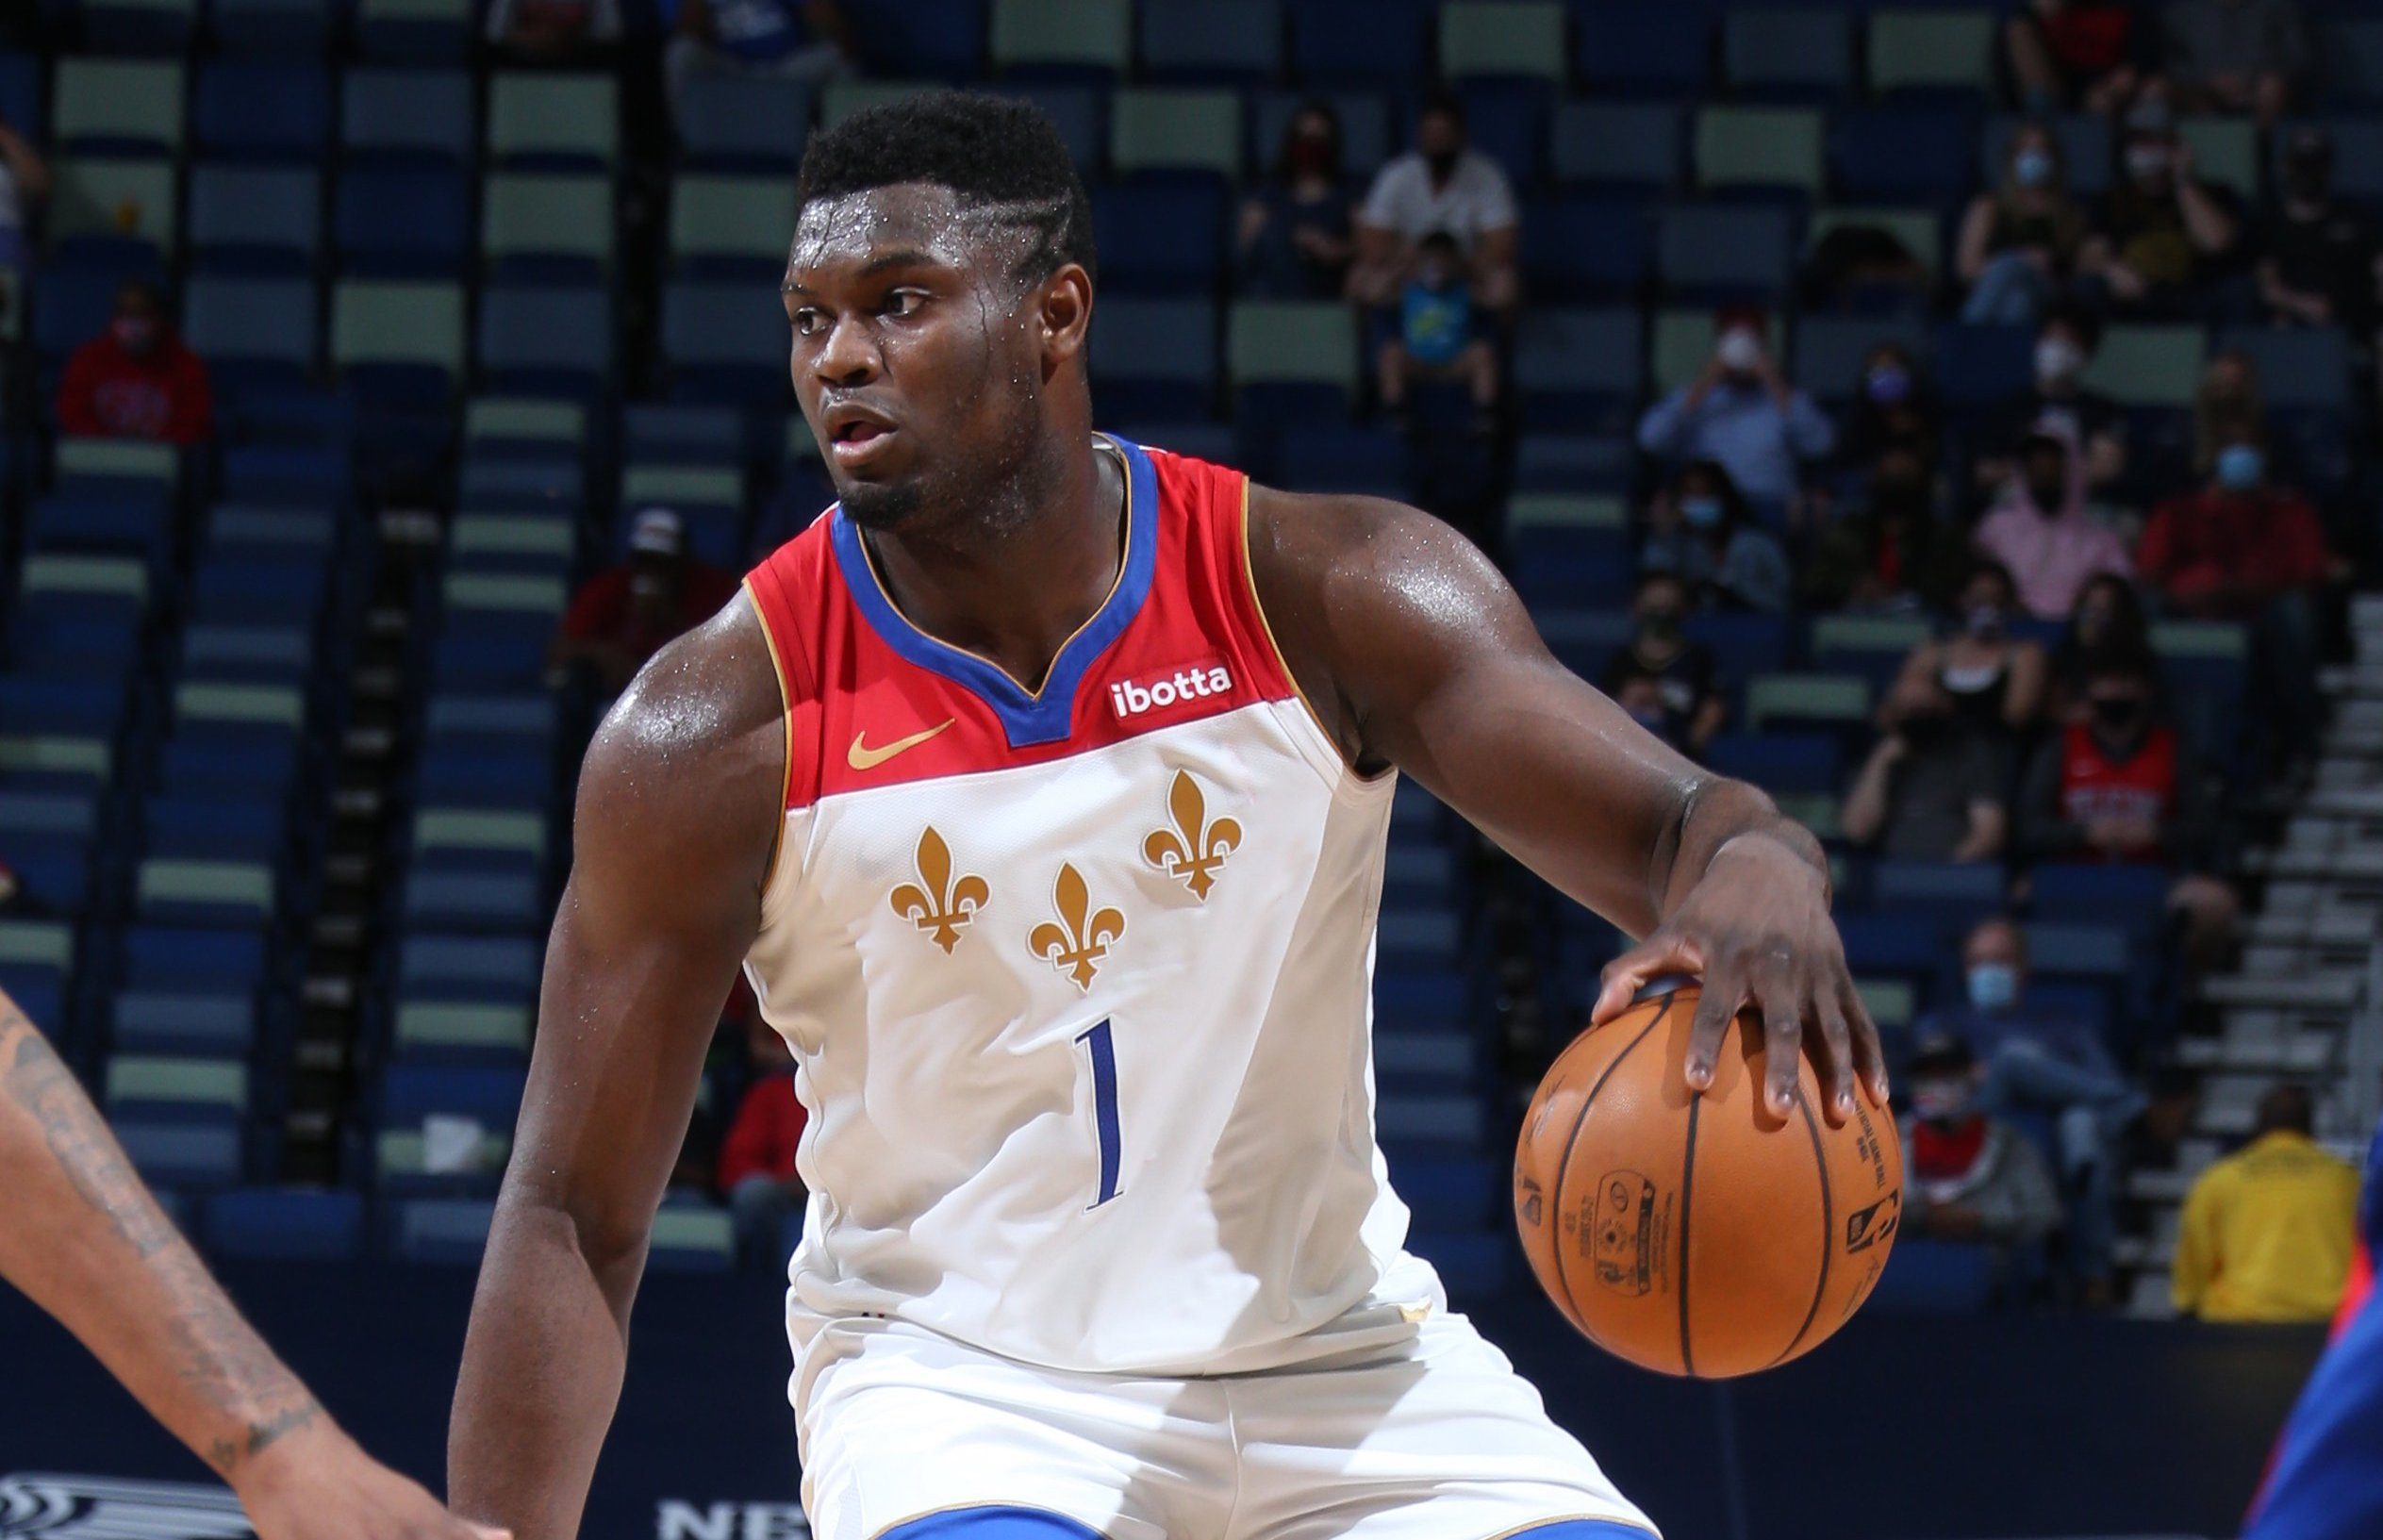 Zion Williamson making it clear he wants to play for Pelicans